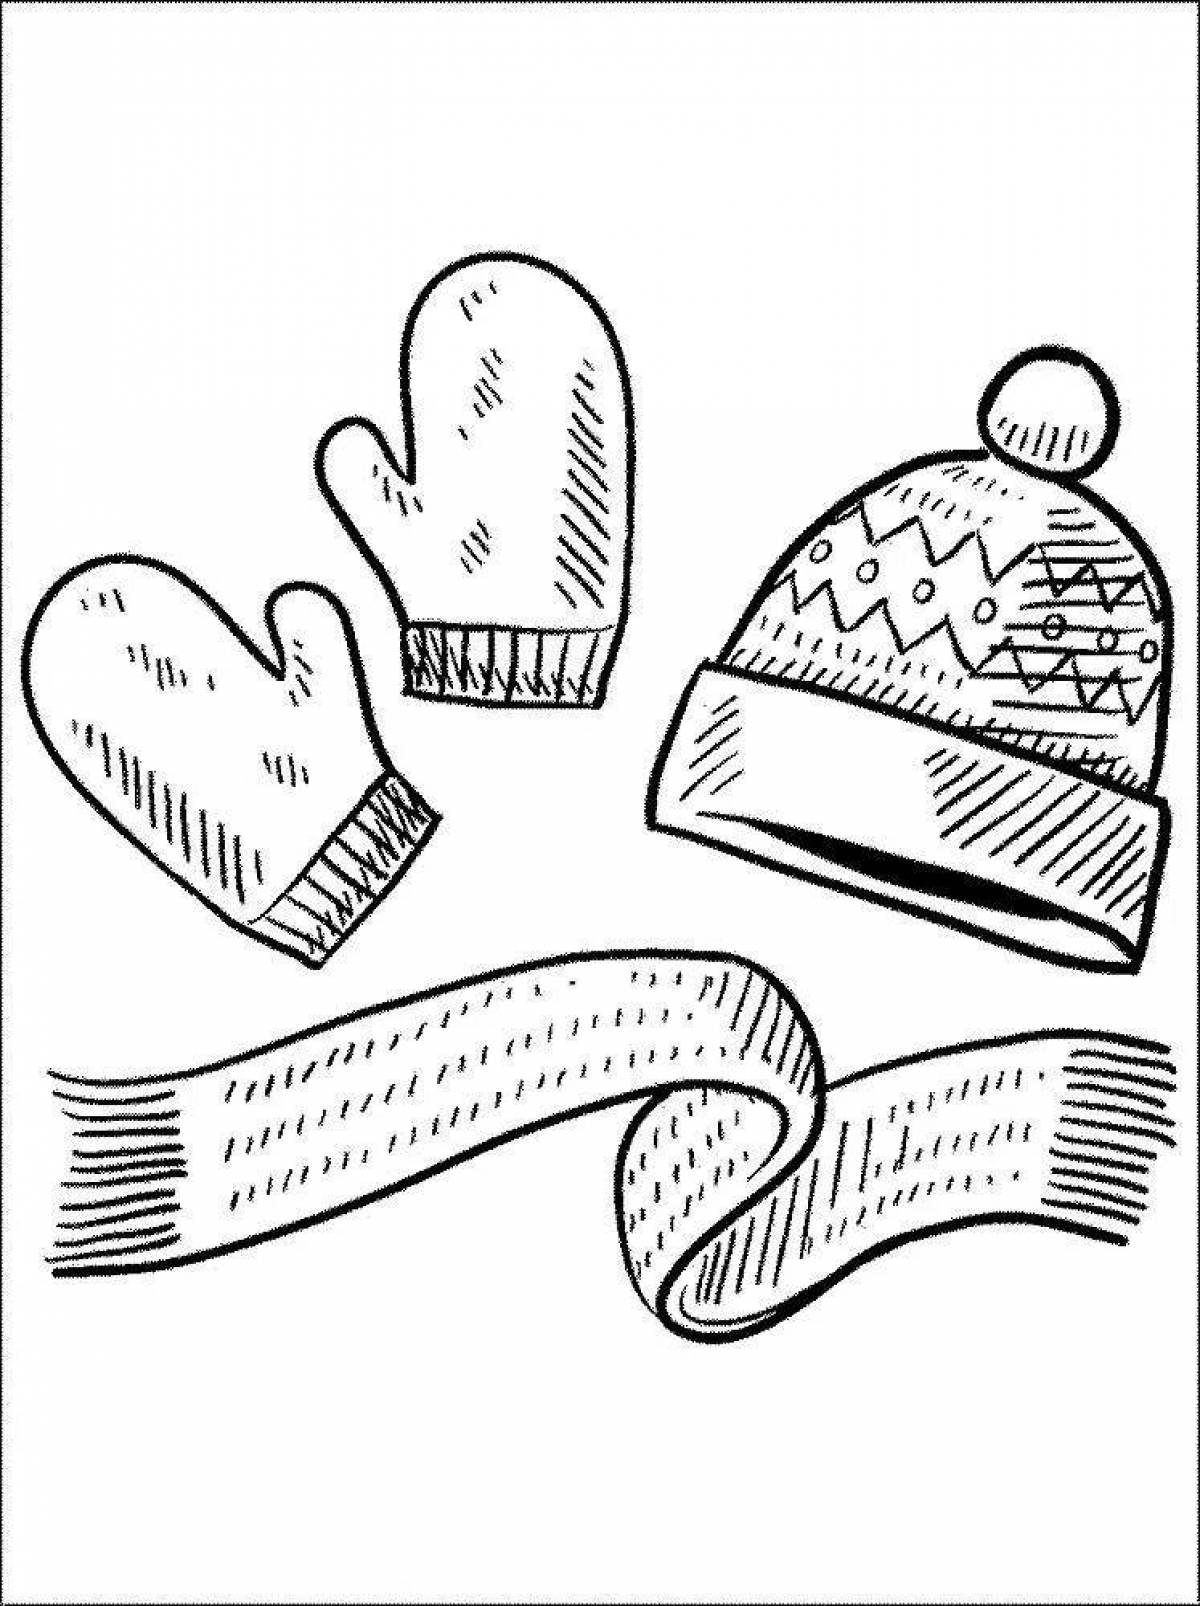 Coloring book shining hat and scarf